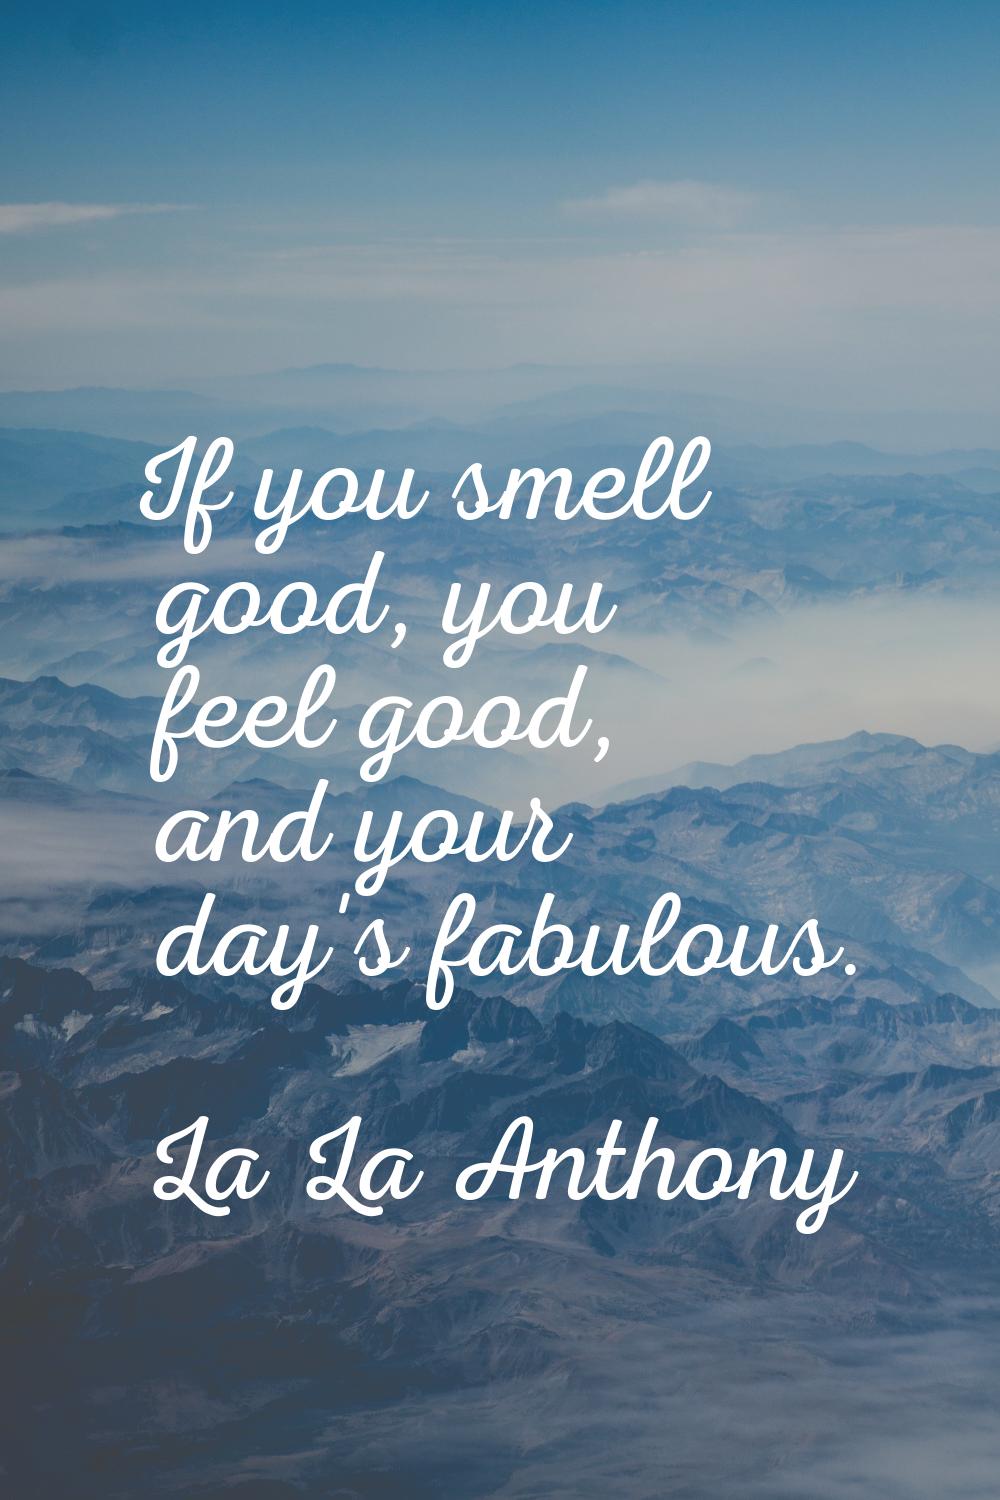 If you smell good, you feel good, and your day's fabulous.